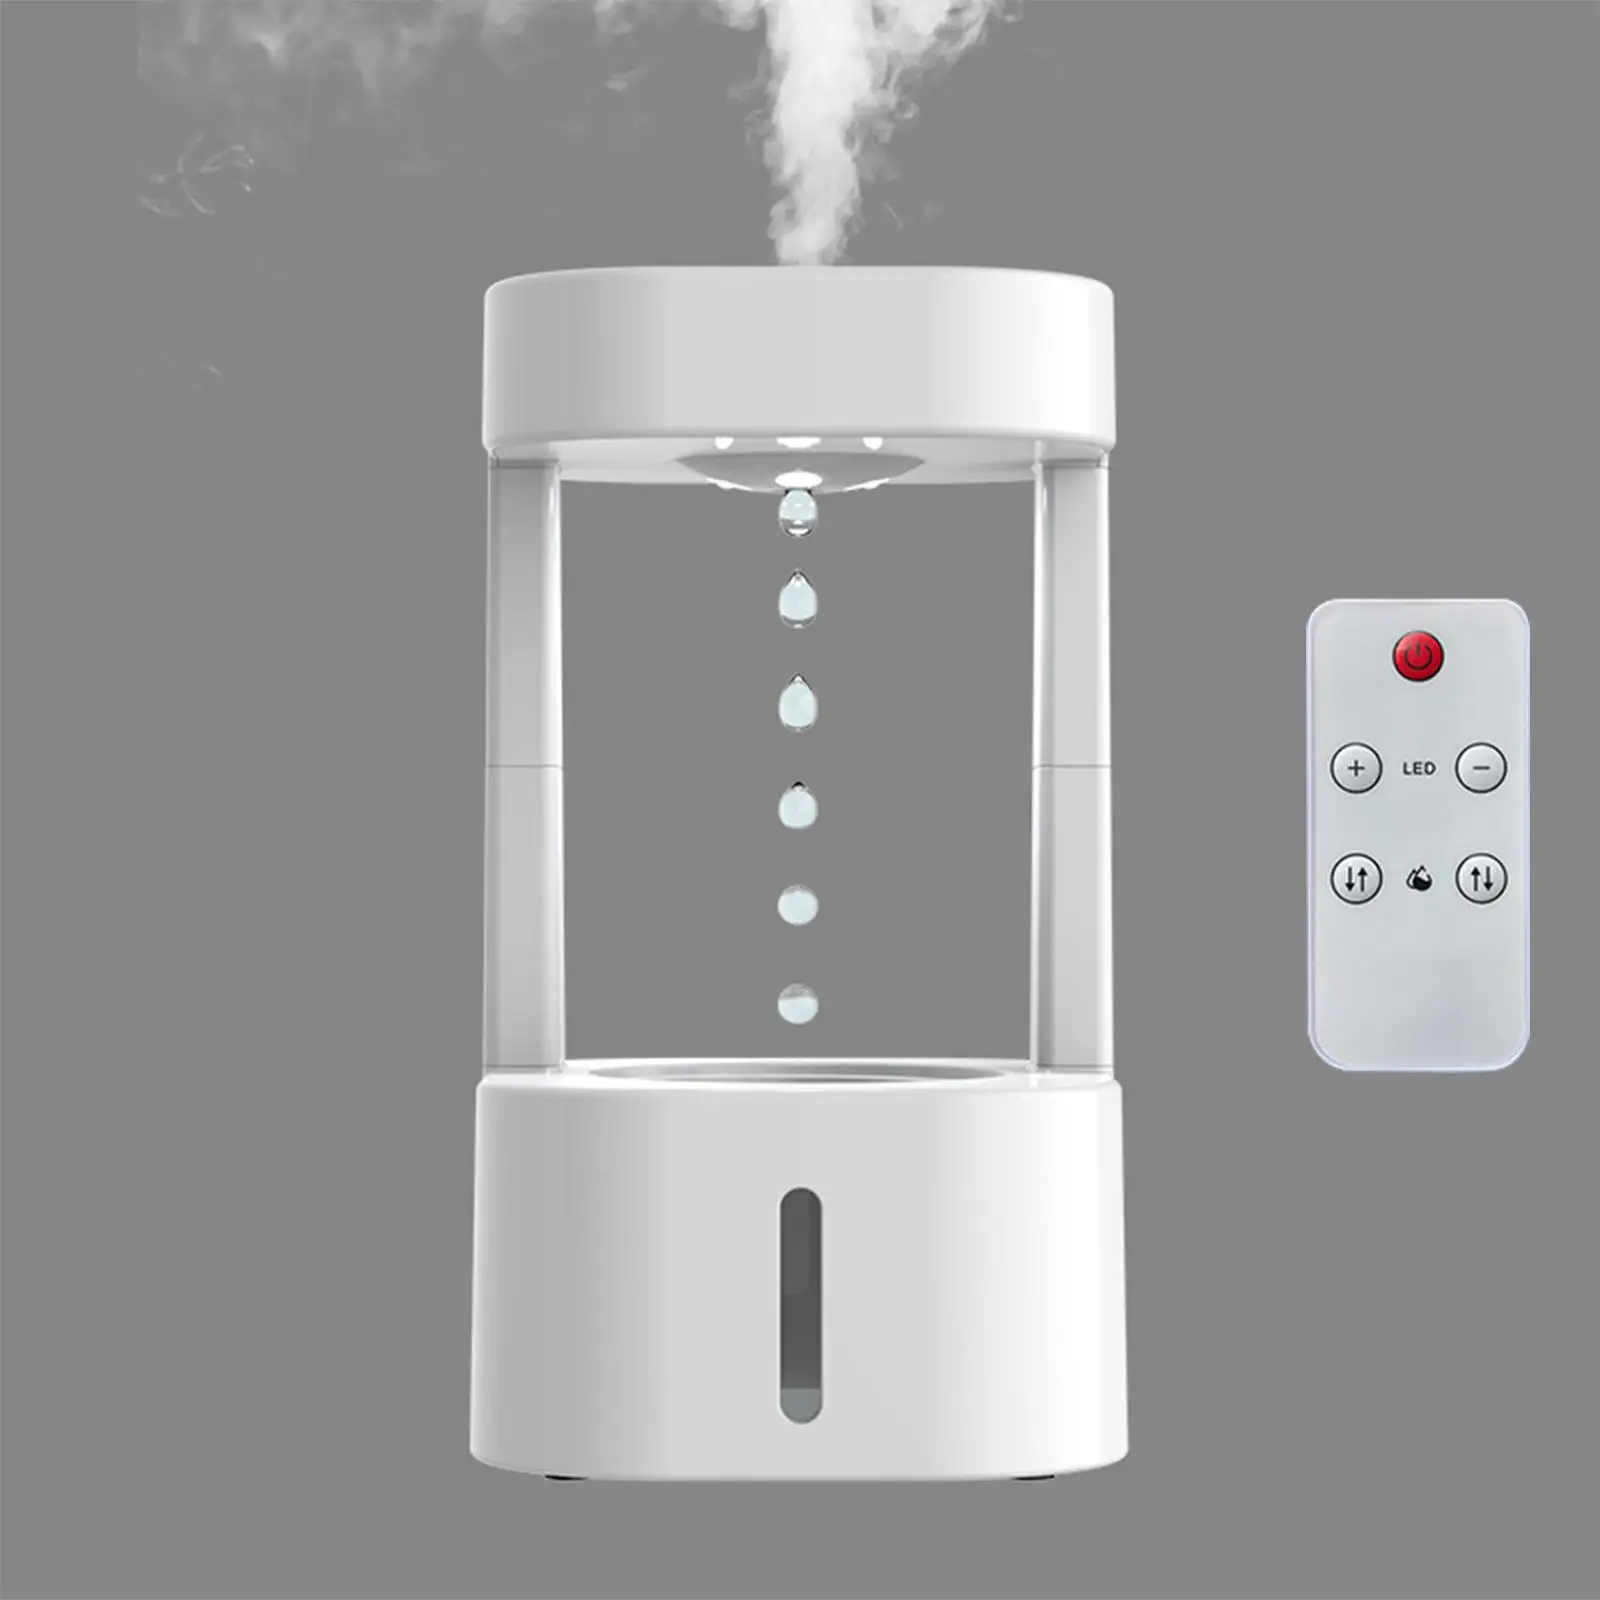 Desktop Air Humidifier Droplet Backflow Large Capacity Fine Mist Spray for Office